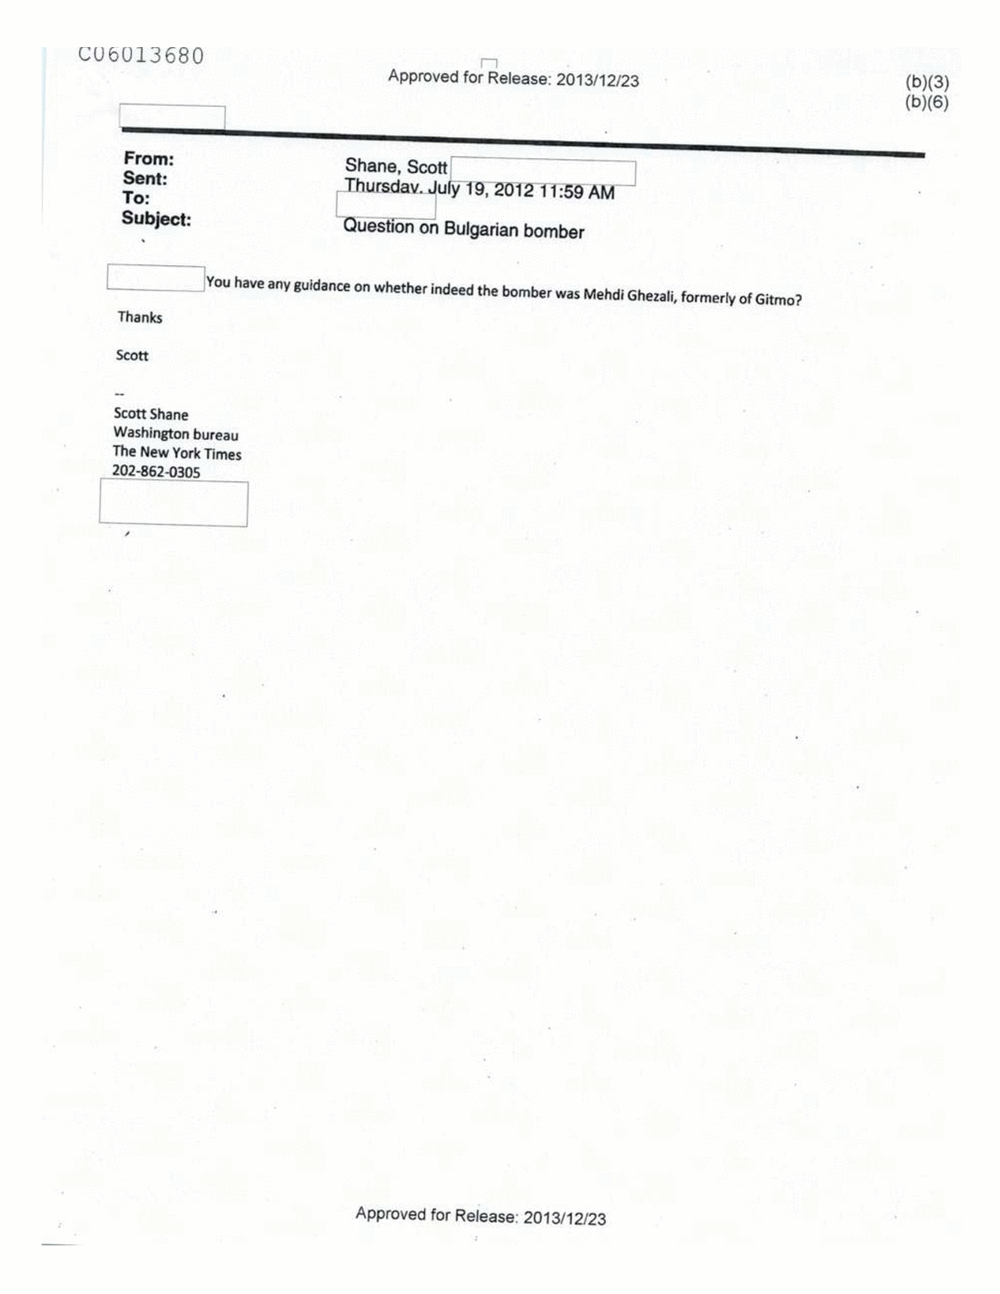 Page 537 from Email Correspondence Between Reporters and CIA Flacks